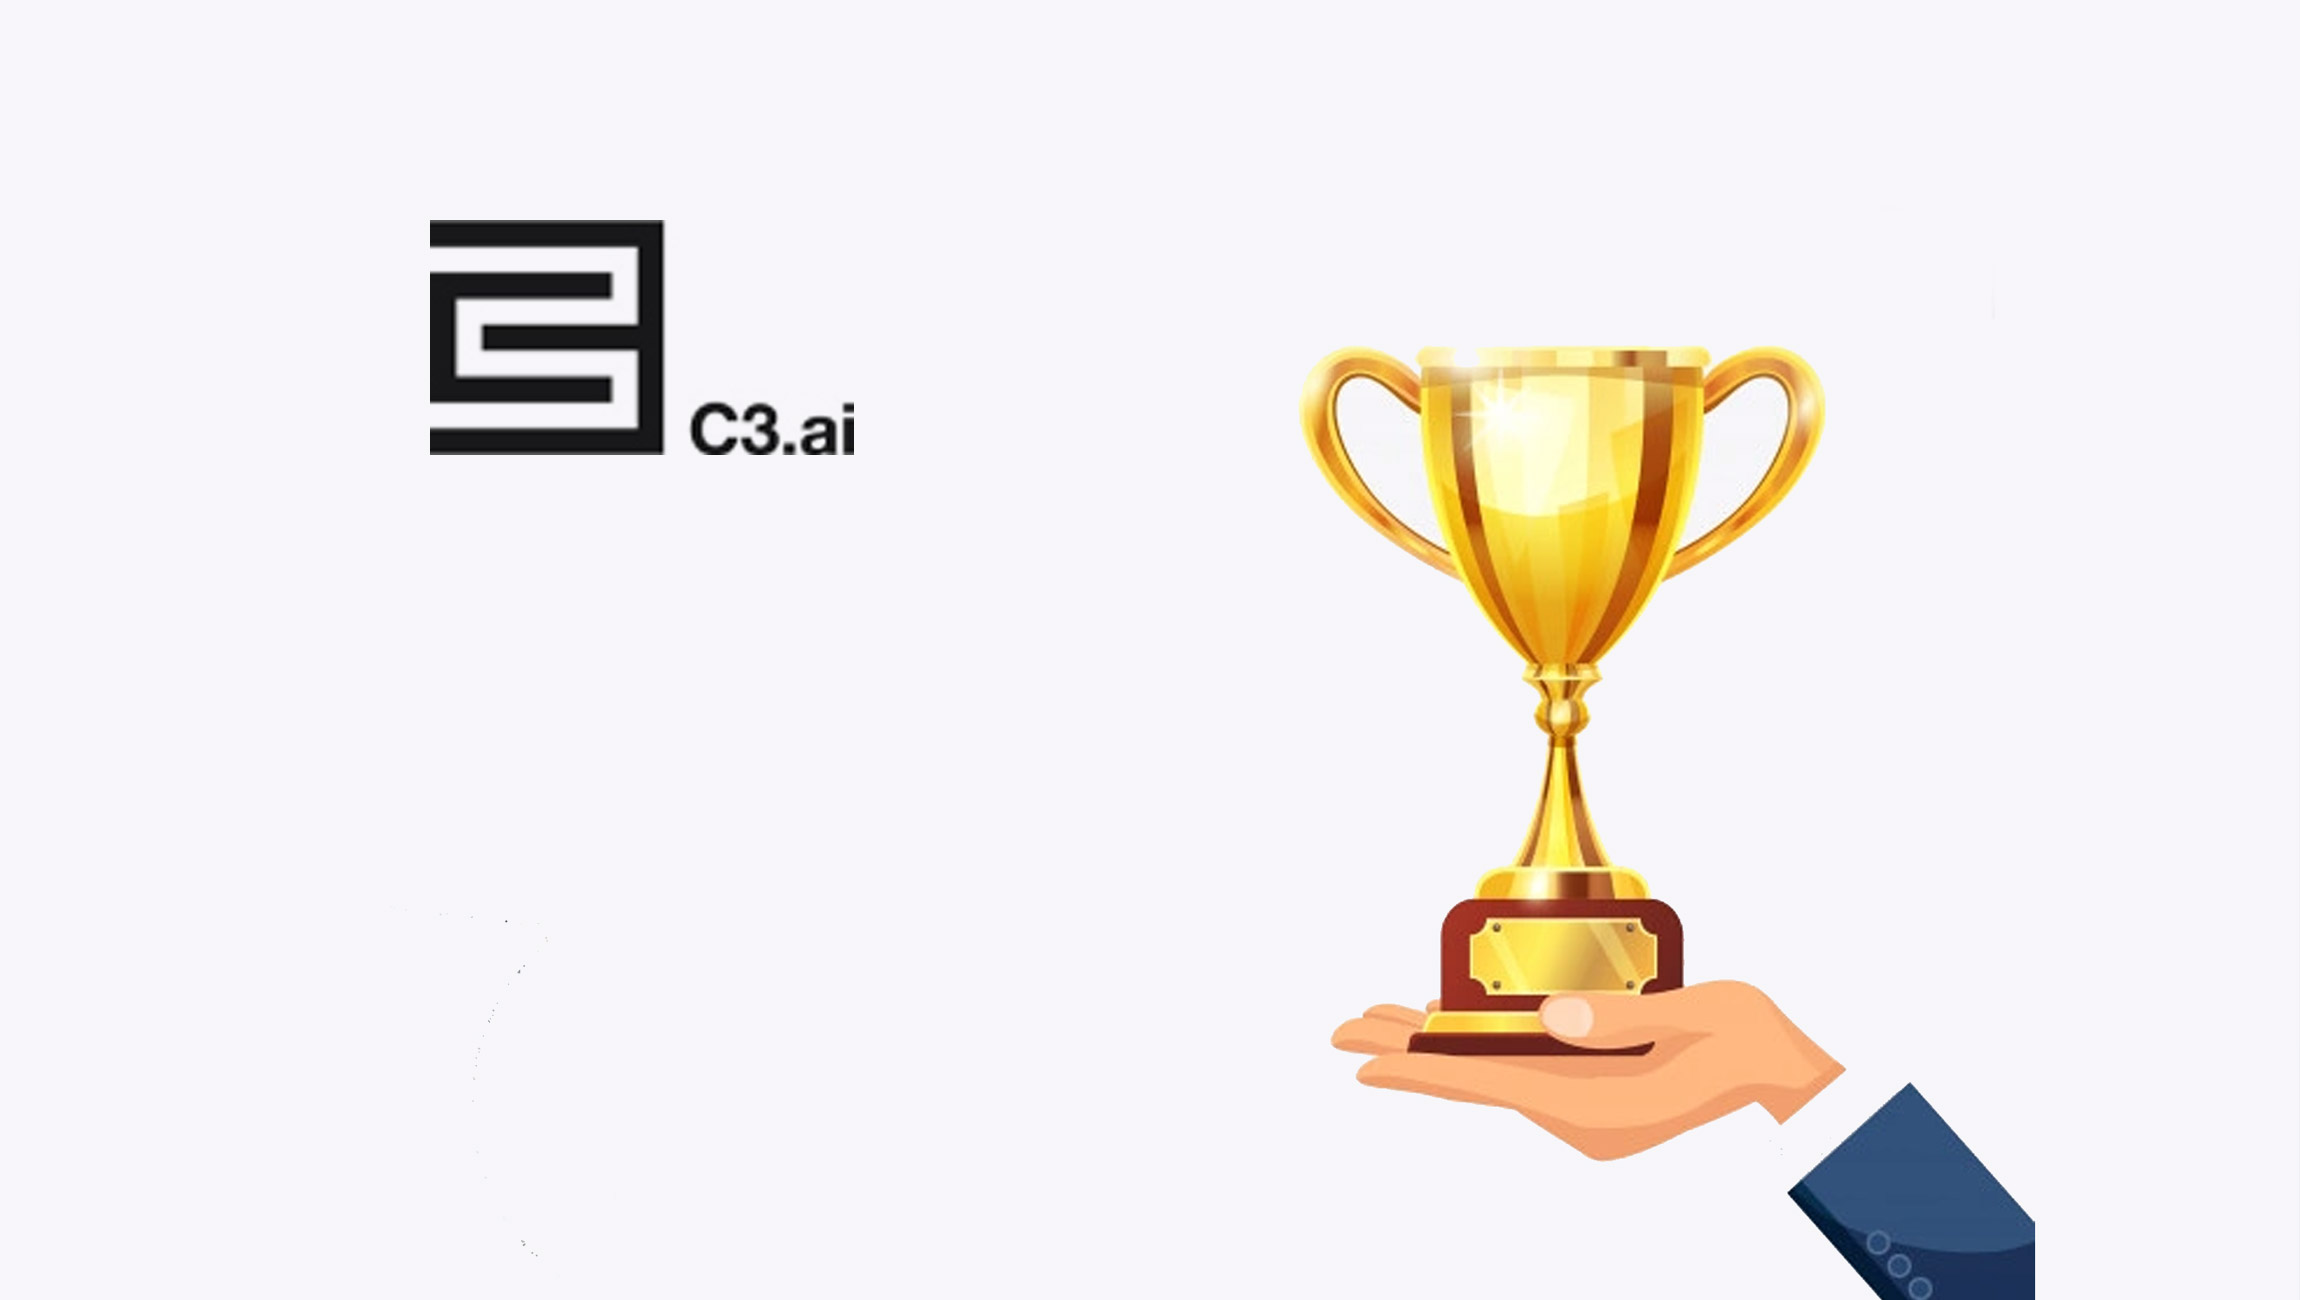 C3.ai Digital Transformation Institute Announces Research Awards for AI to Transform Cybersecurity and Secure Critical Infrastructure